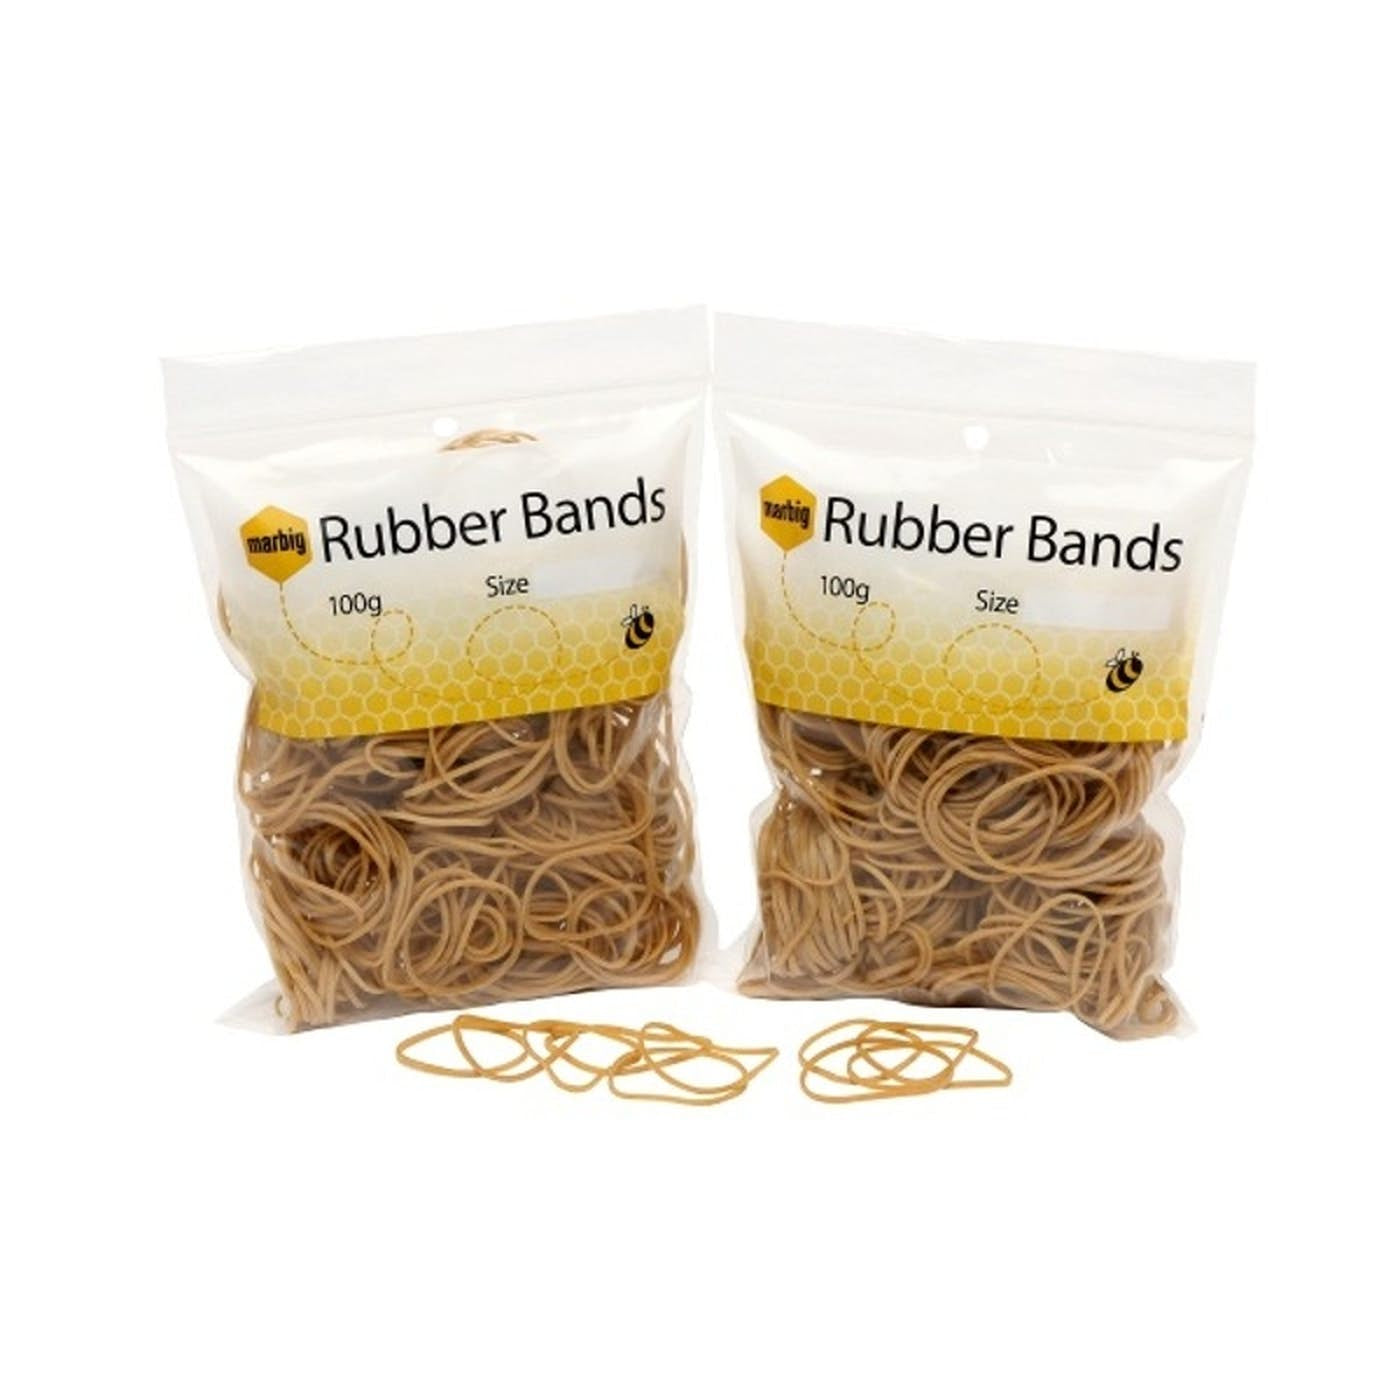 Rubberbands size 16